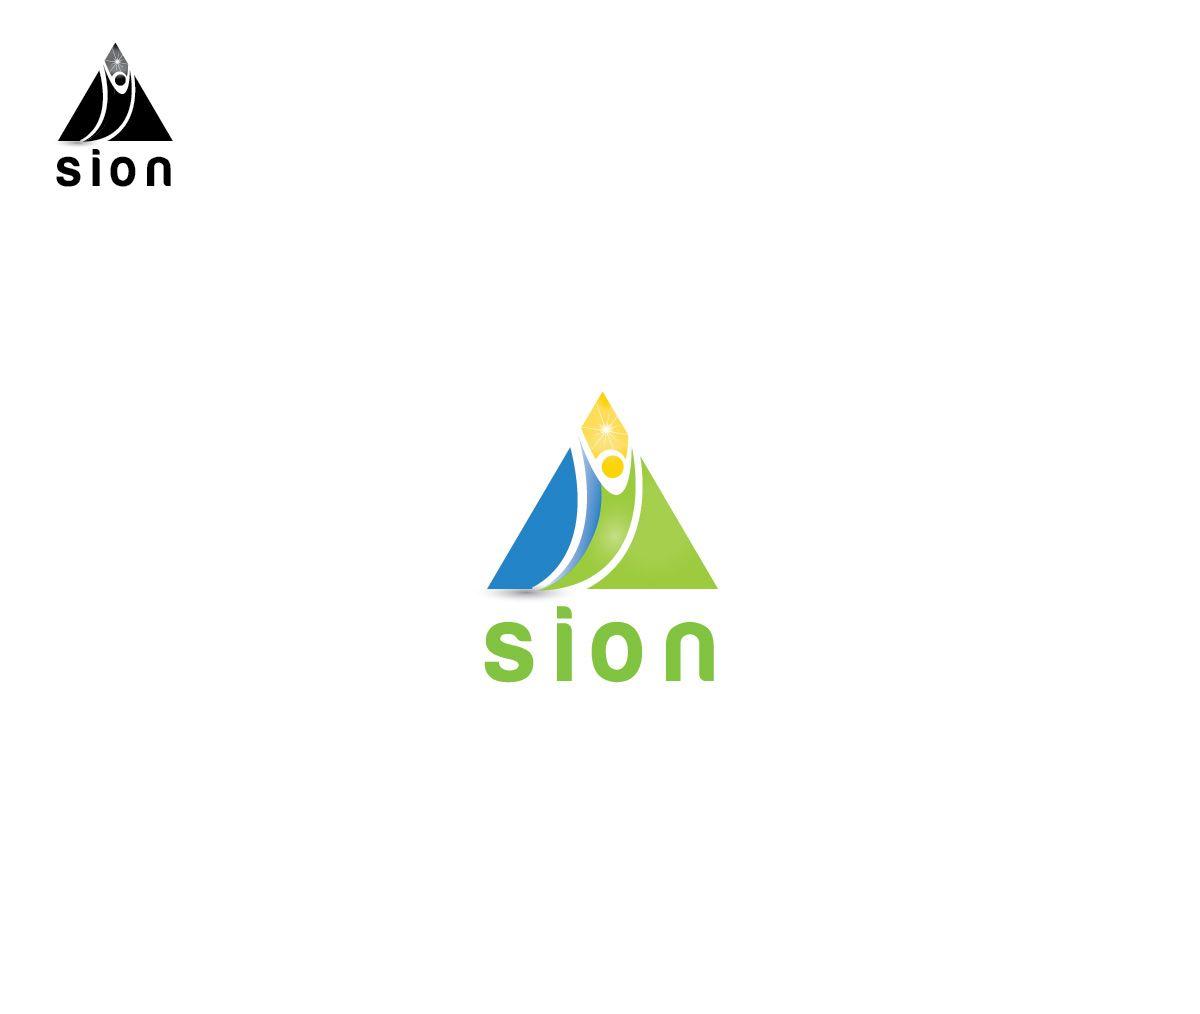 Sion Logo - Ministry Logo Design for sion by Alexandra | Design #4490701